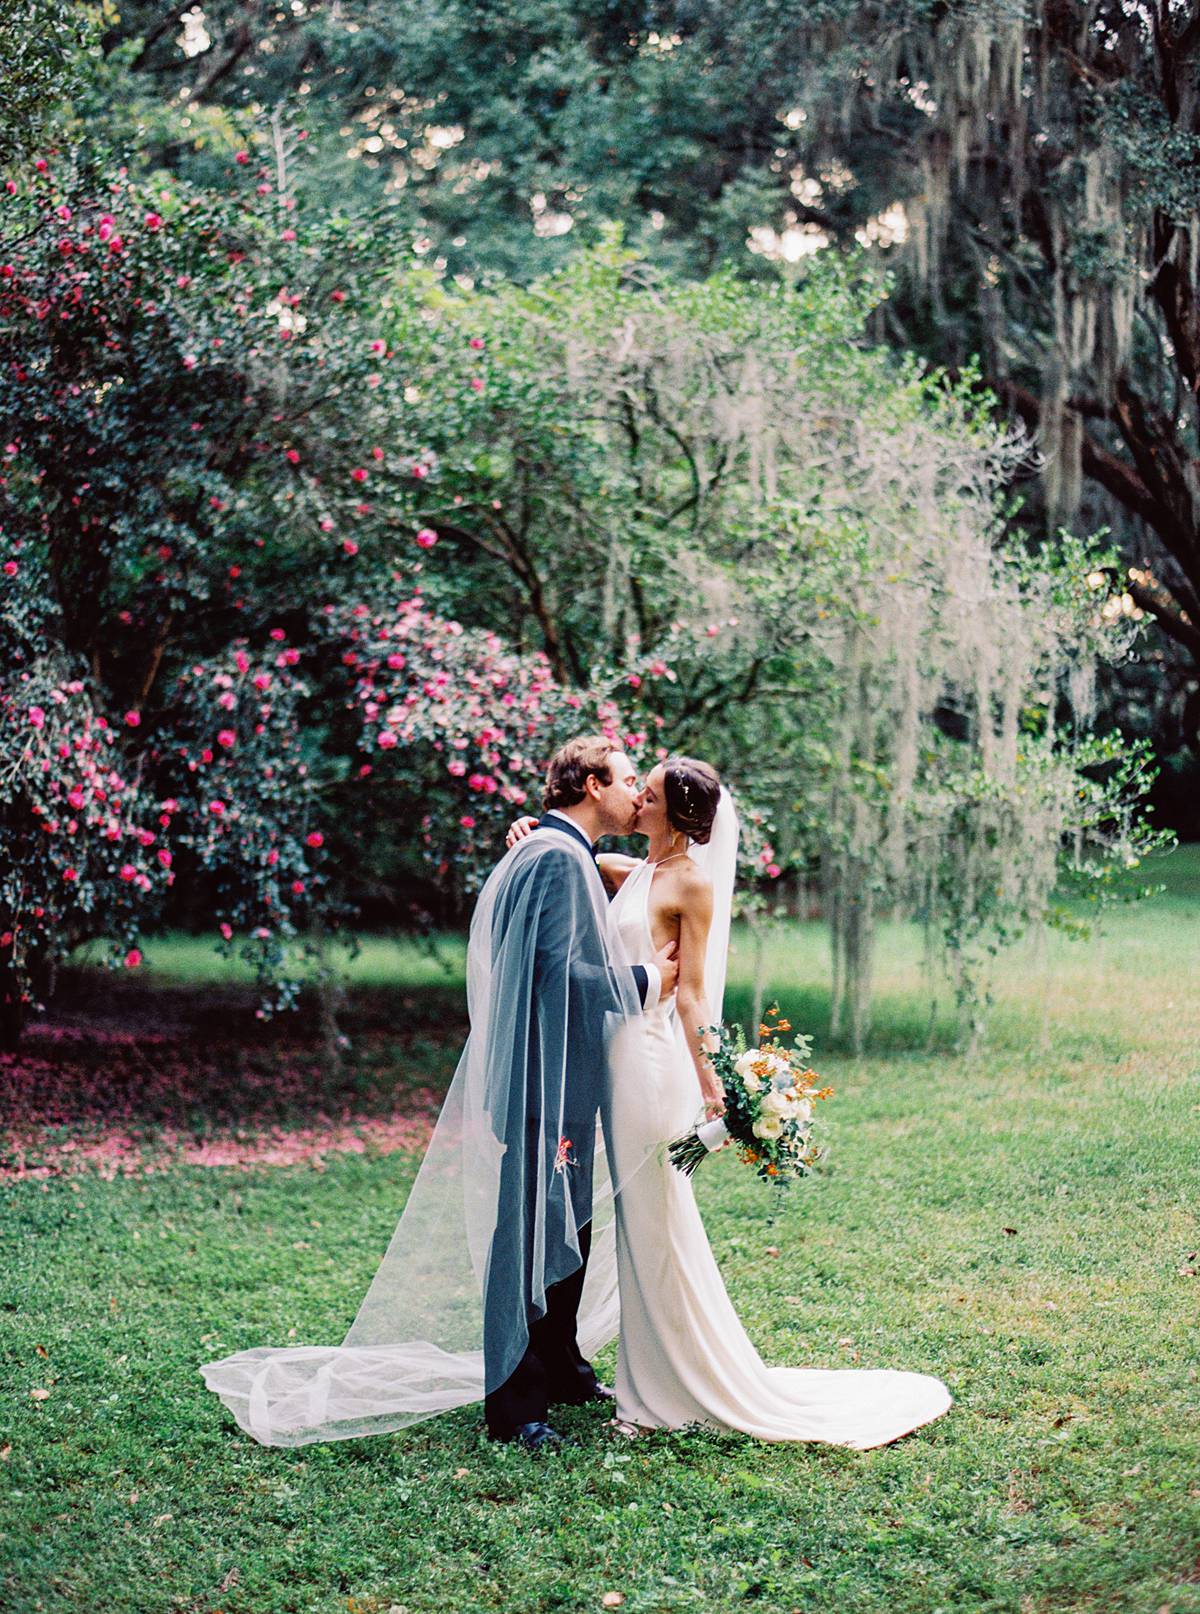 wedding portrait at legare waring house in charleston sc on kodak portra 800 film with blooming flowers on oak trees